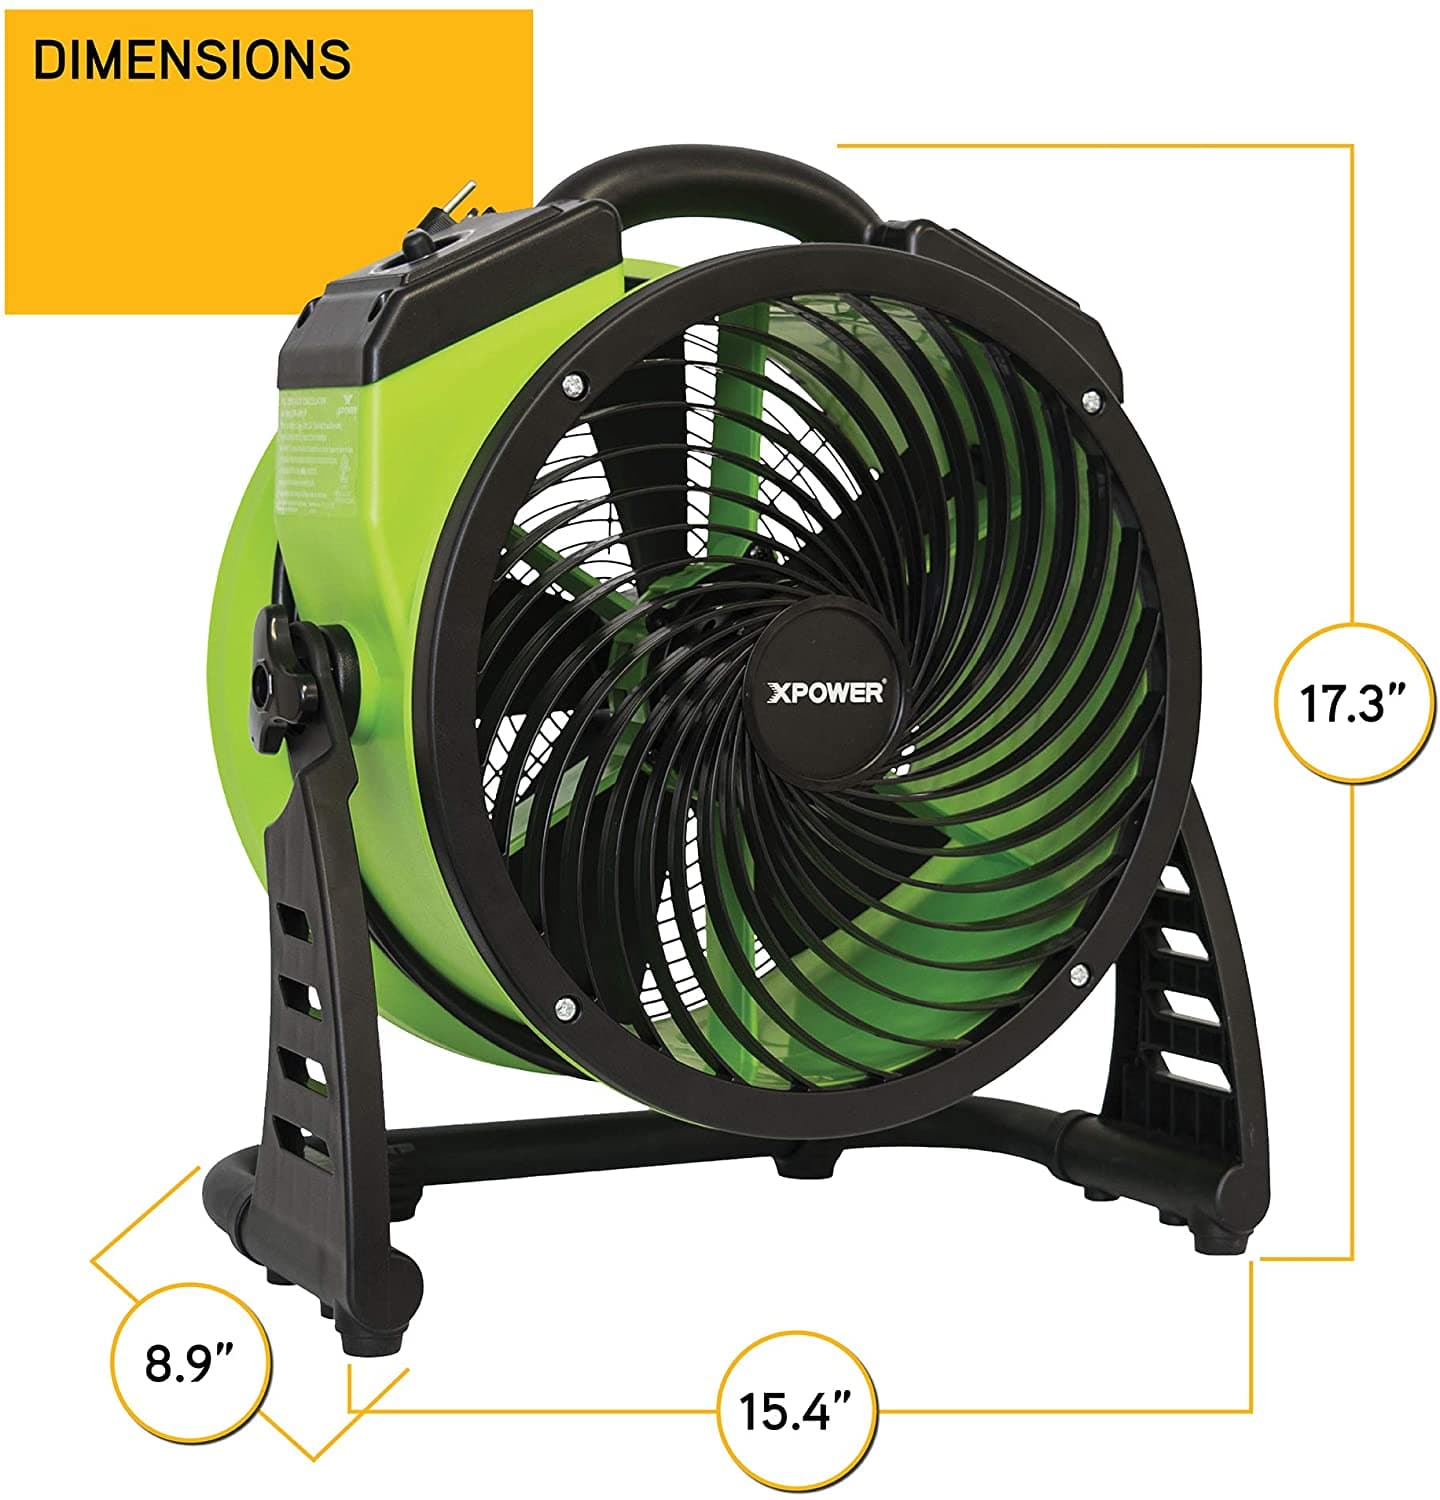 XPOWER FC-200 Heavy Duty Industrial High Velocity Whole Room Air Mover Air Circulator Utility Floor Fan, Variable Speed, Timer, 13 inch, 1300 CFM